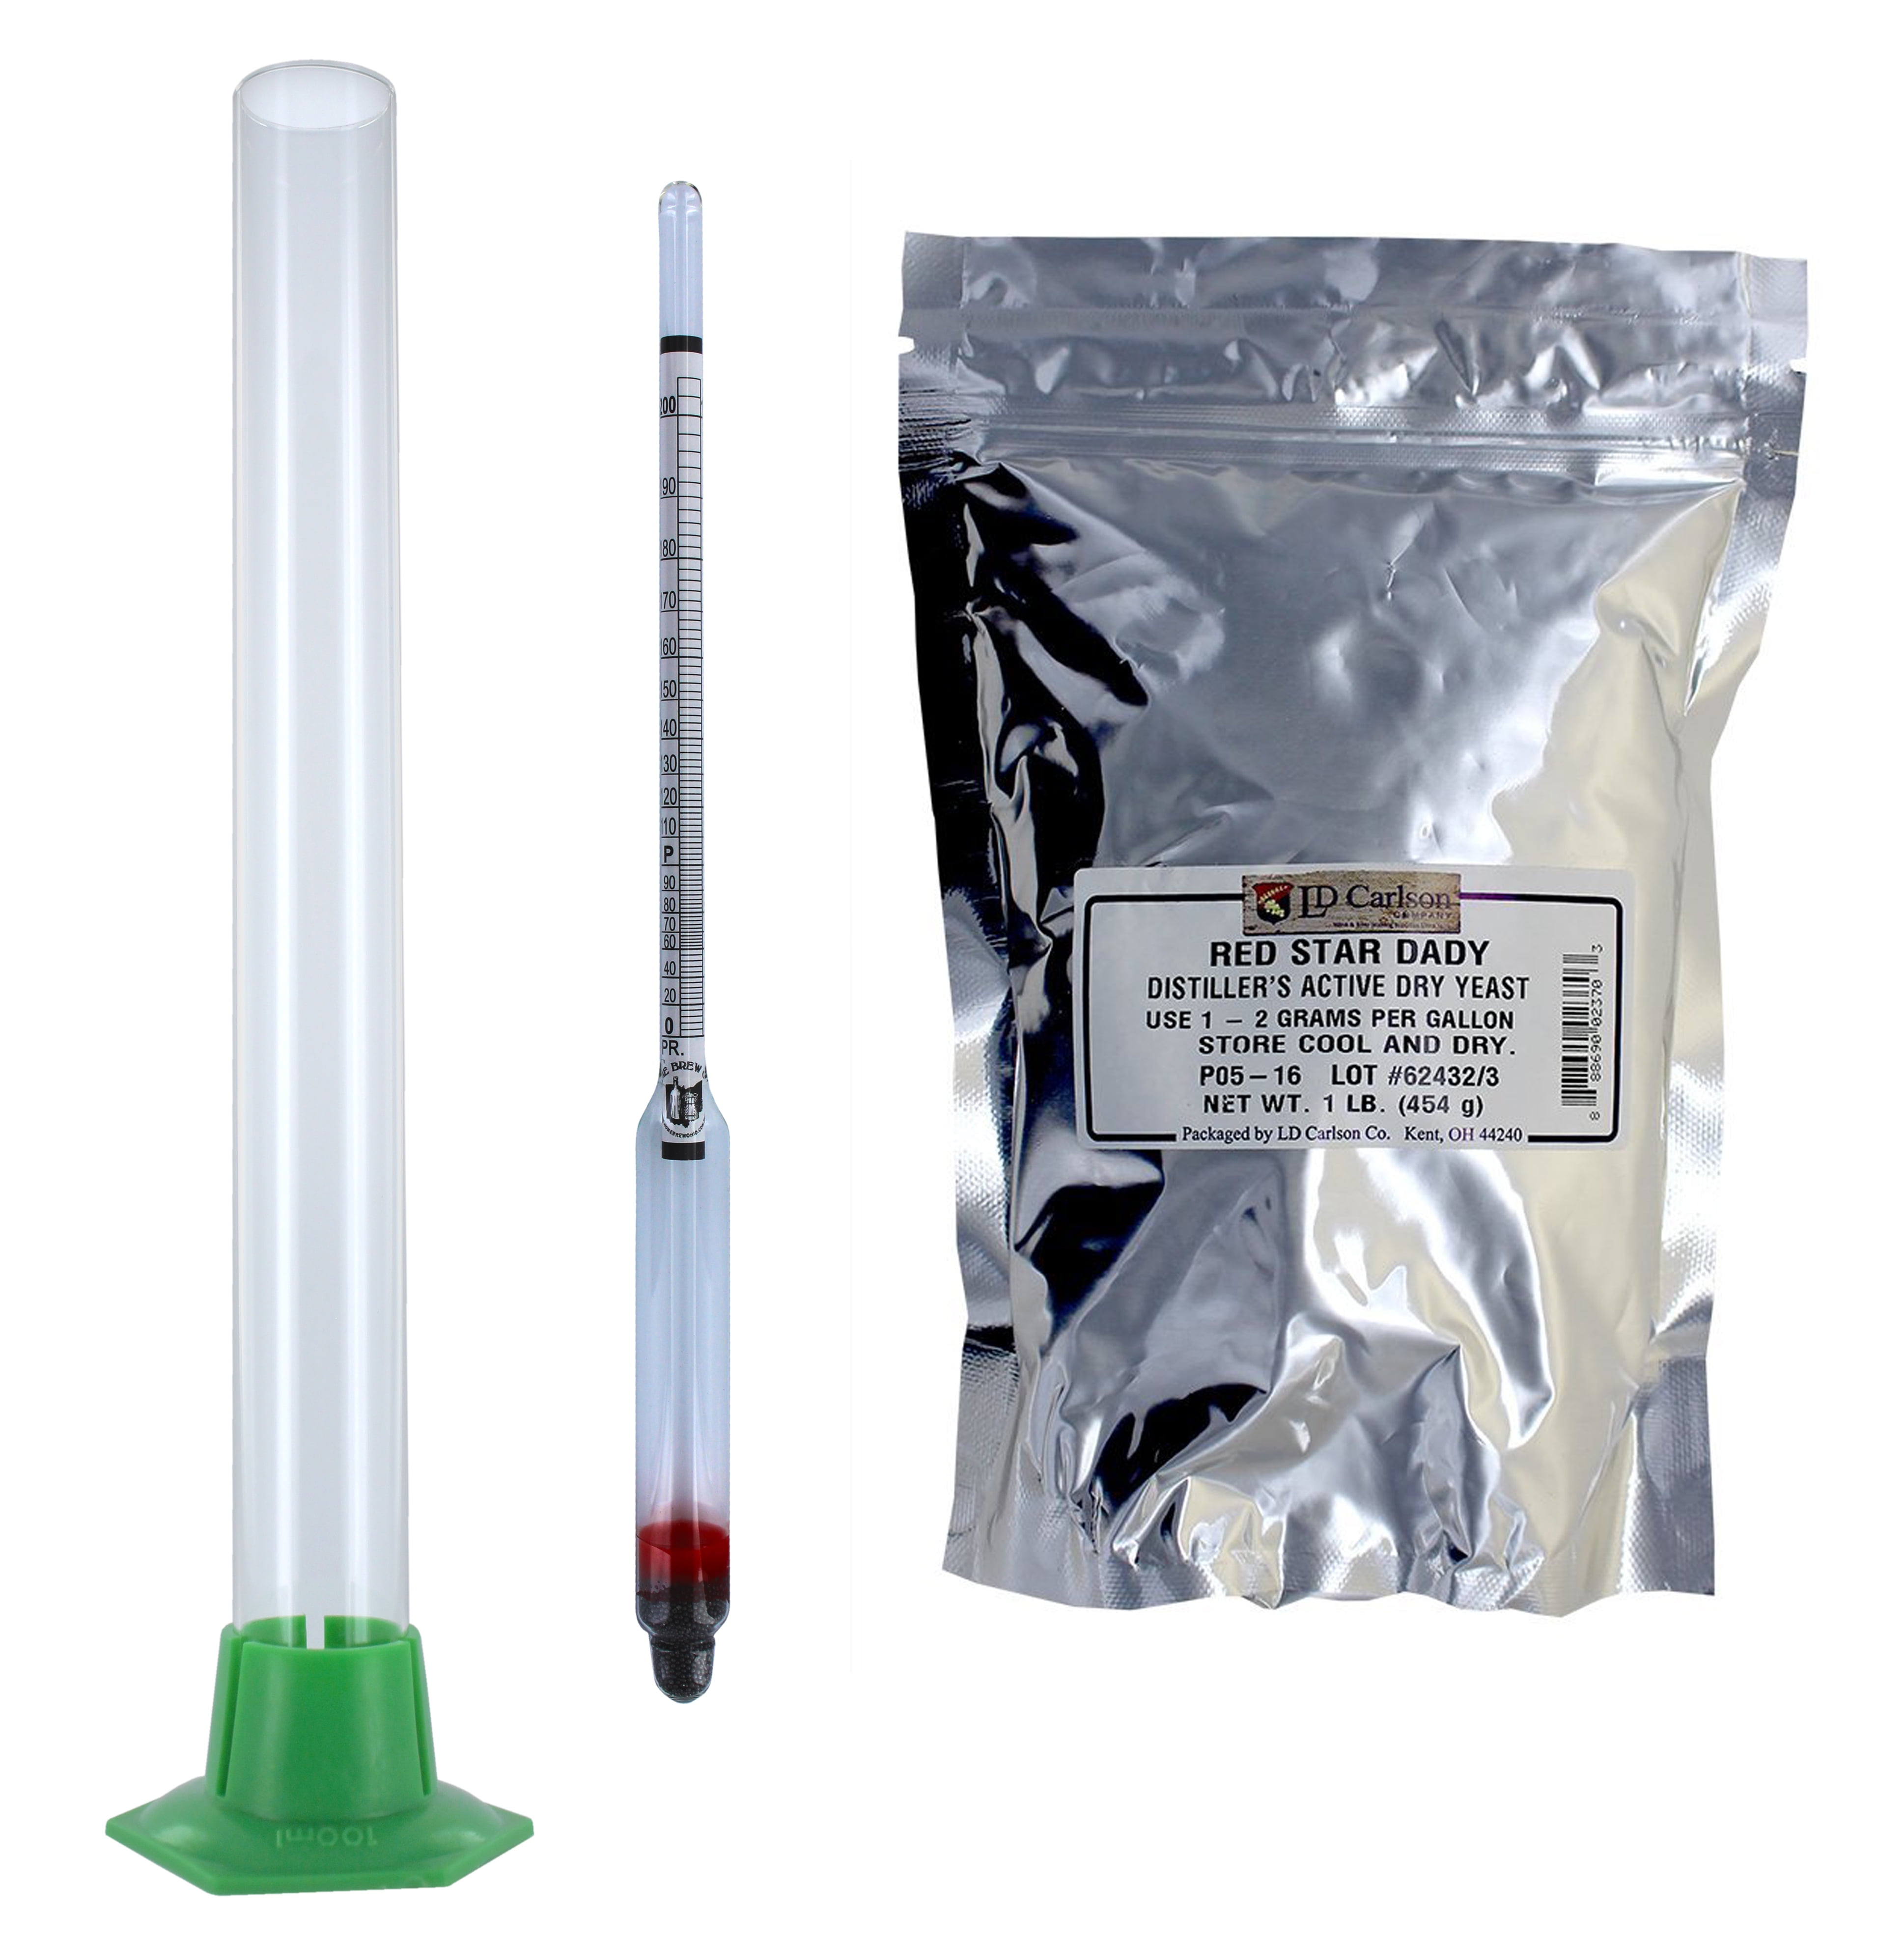 Proof And Tralle Hydrometer With 12 Glass Test Jar With Distillers Active Dry Yeast 1 Lb. Home Brew Ohio RH-MUSC-GSG6